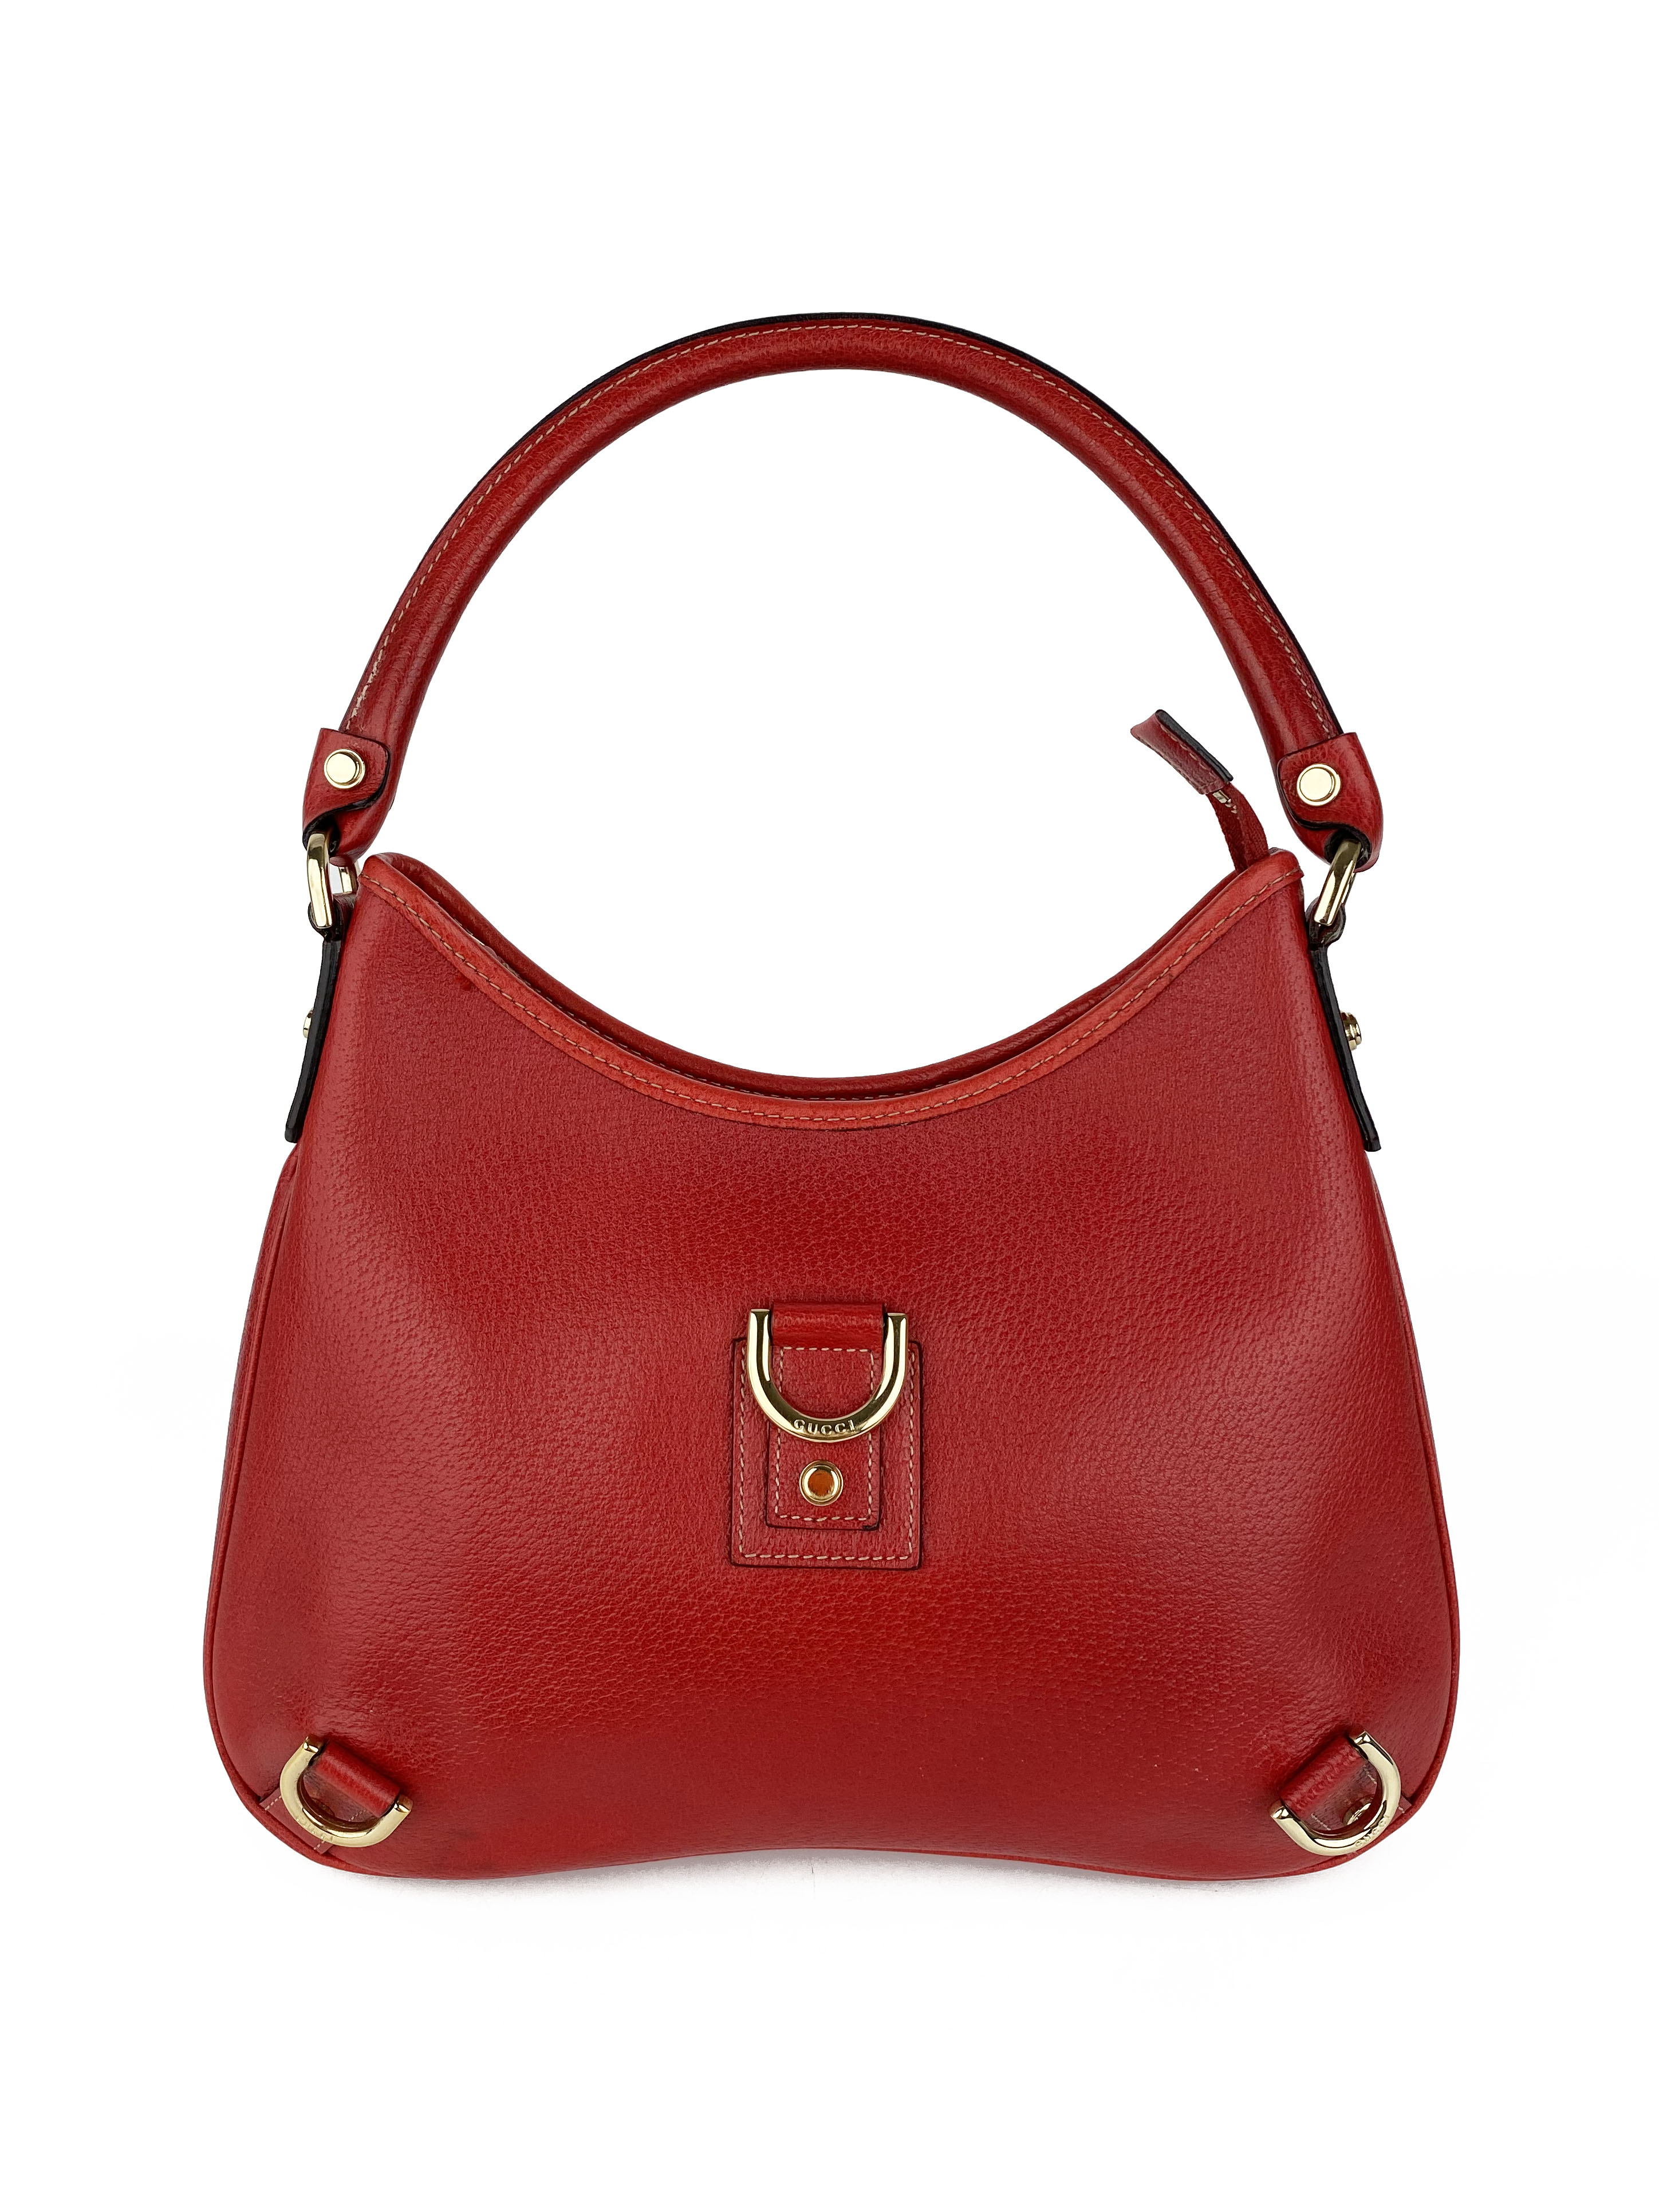 GucciVintageRedHoboBag-3_f29b2bde-7714-48df-93ce-4a83aa6f19d0.jpg